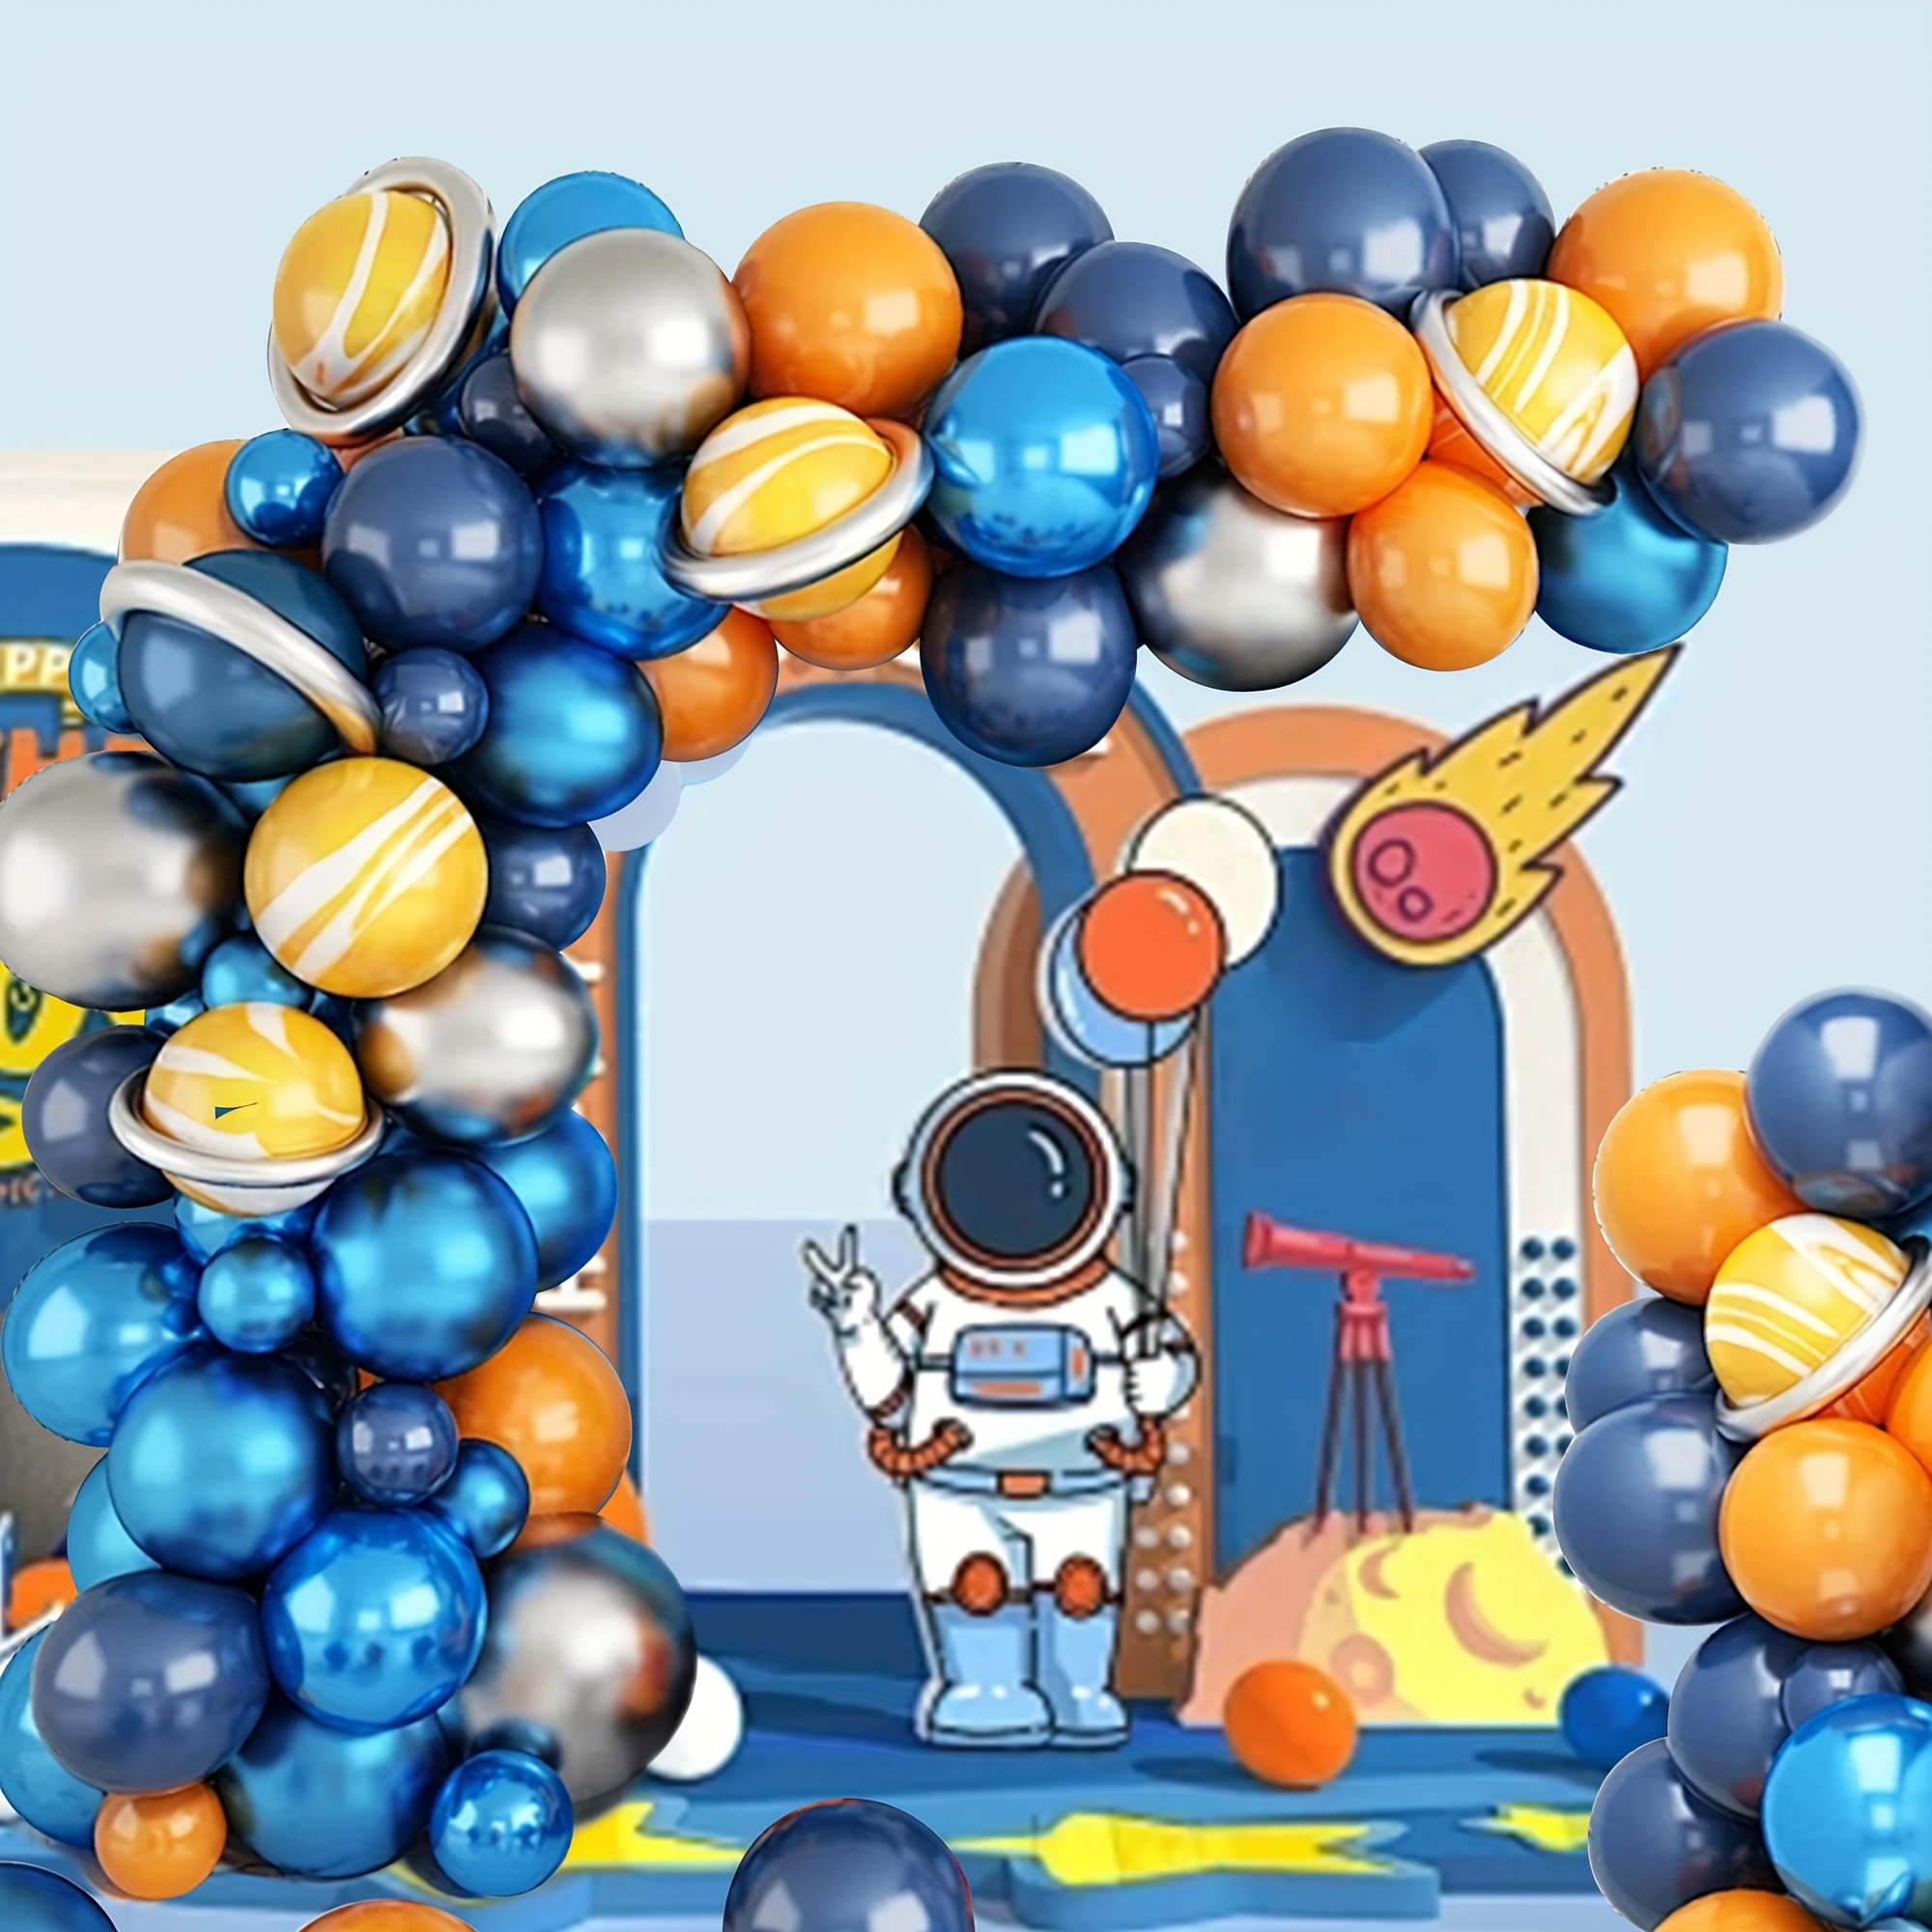 

Space Astronaut-themed Balloon Arch Kit, 117 Pieces, Latex Garland Set For Galactic Party, Birthday Decor, Celebrations – Suitable For Teens And Adults 14+